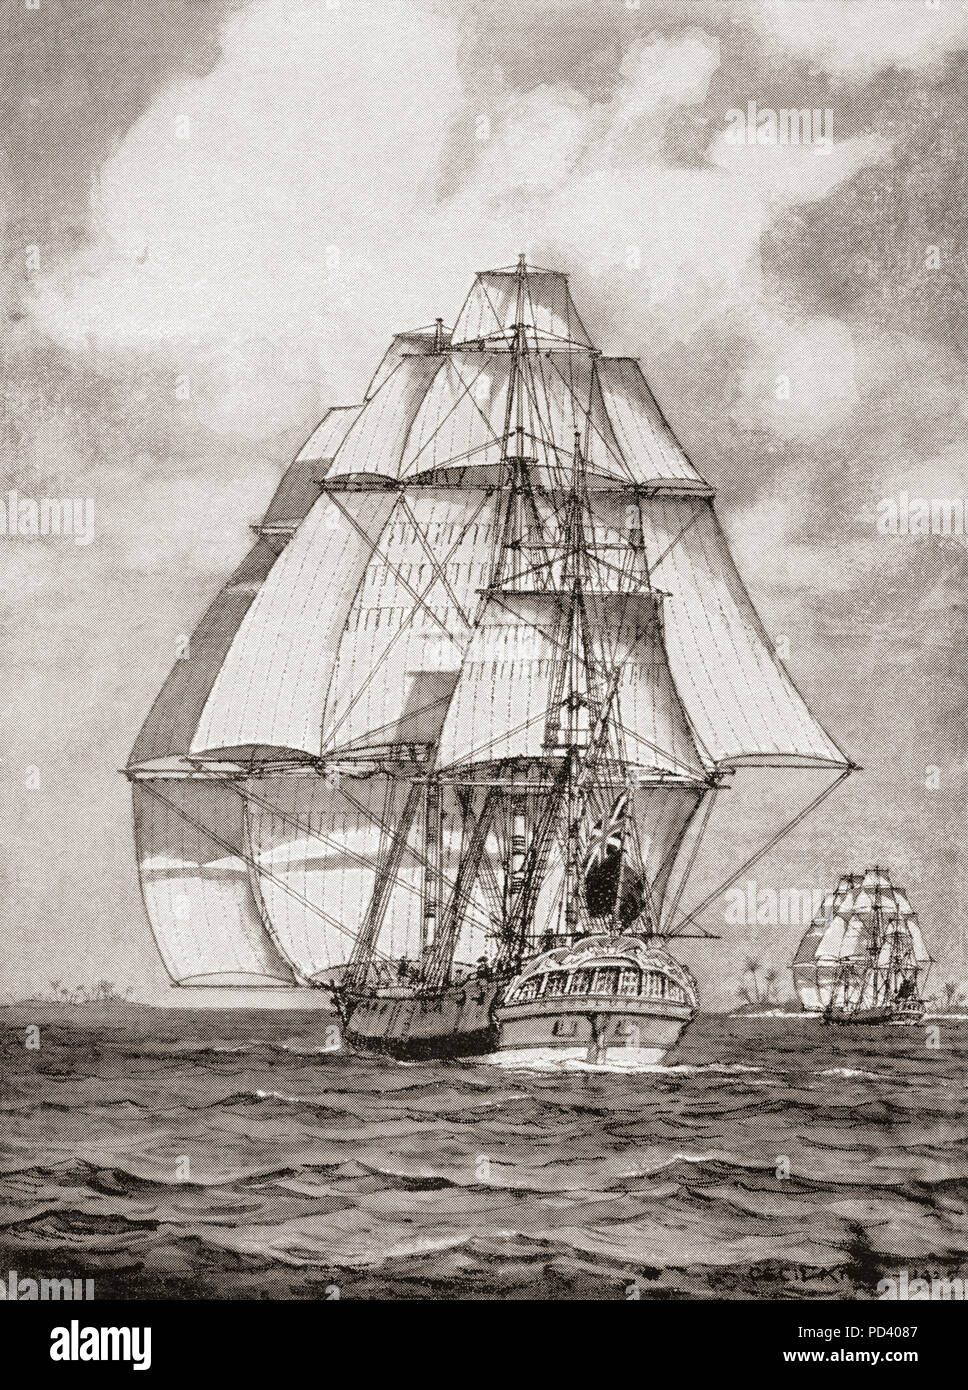 The ships HMS Resolution and HMS Discovery off the coast of Australia during the Third Voyage of Captain James Cook, 1776-1780.  From The Book of Ships, published c.1920. Stock Photo